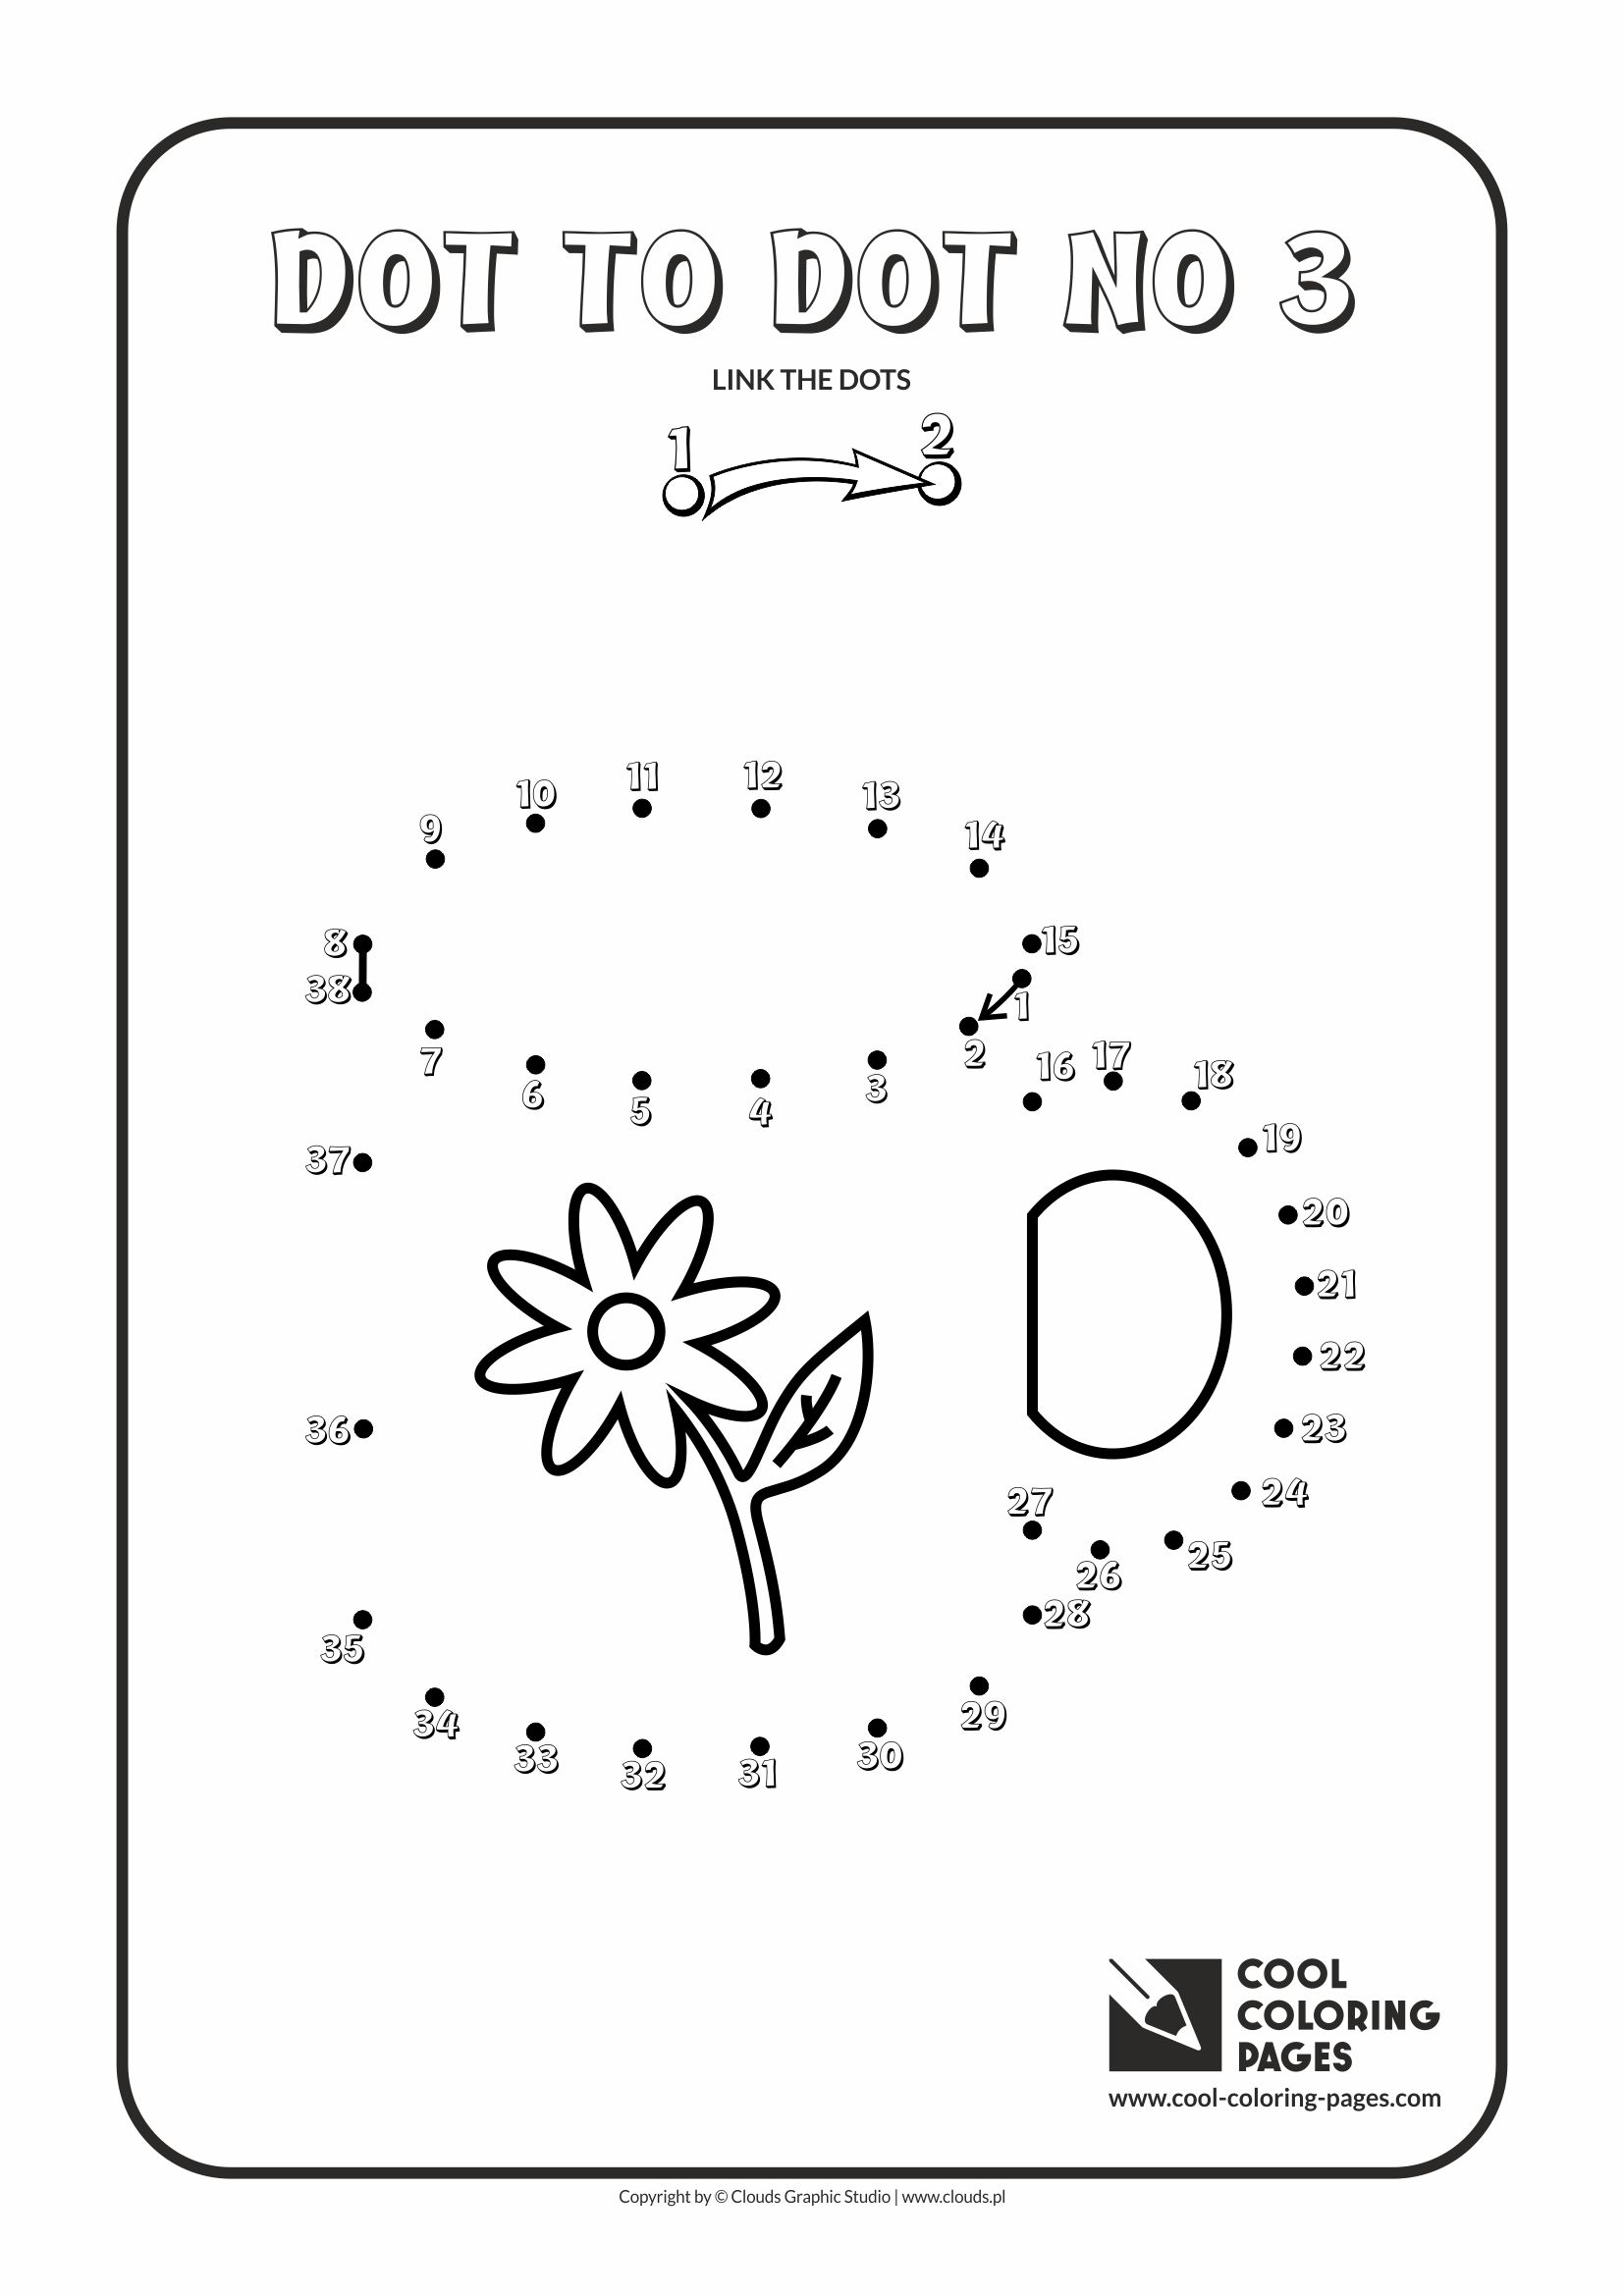 Cool Coloring Pages - Dot to dot / Dot to dot no 3